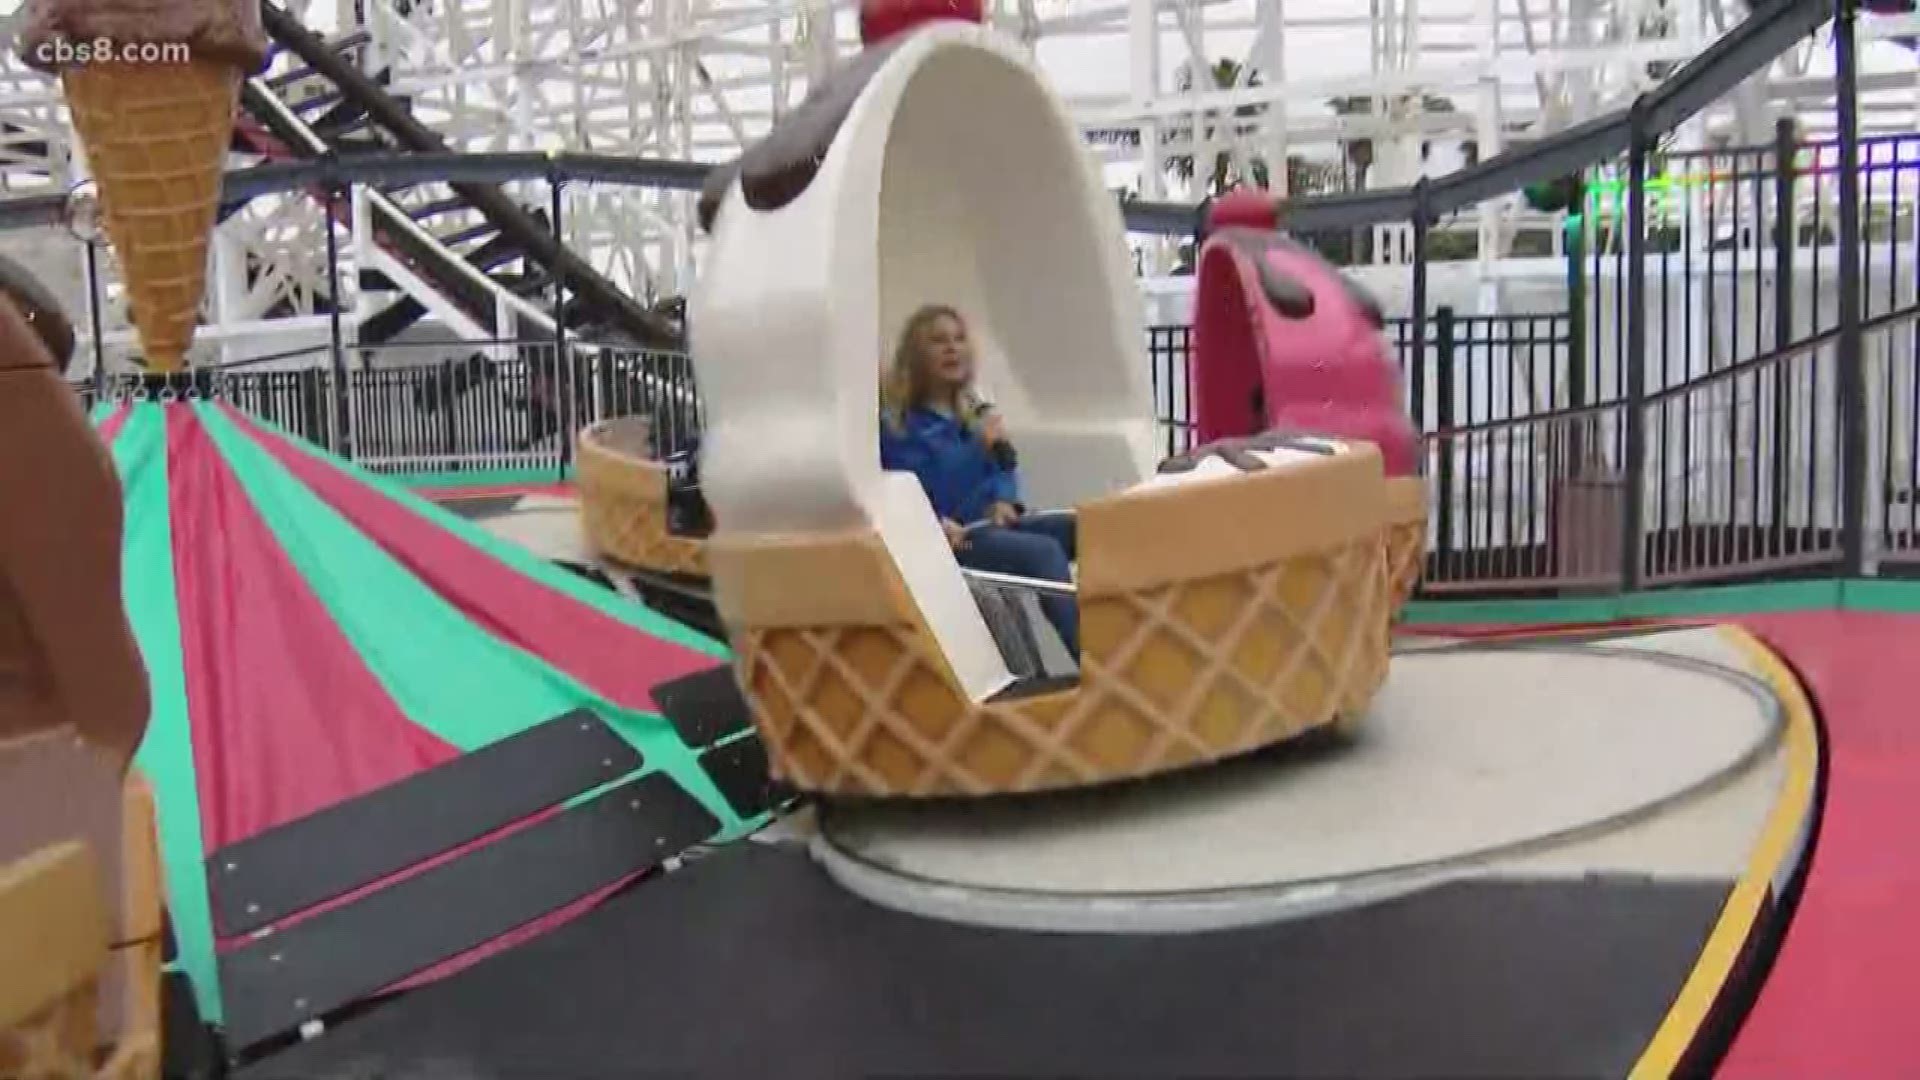 In Wednesday morning's Daily Dose brand new attractions unveiled at Belmont Park.